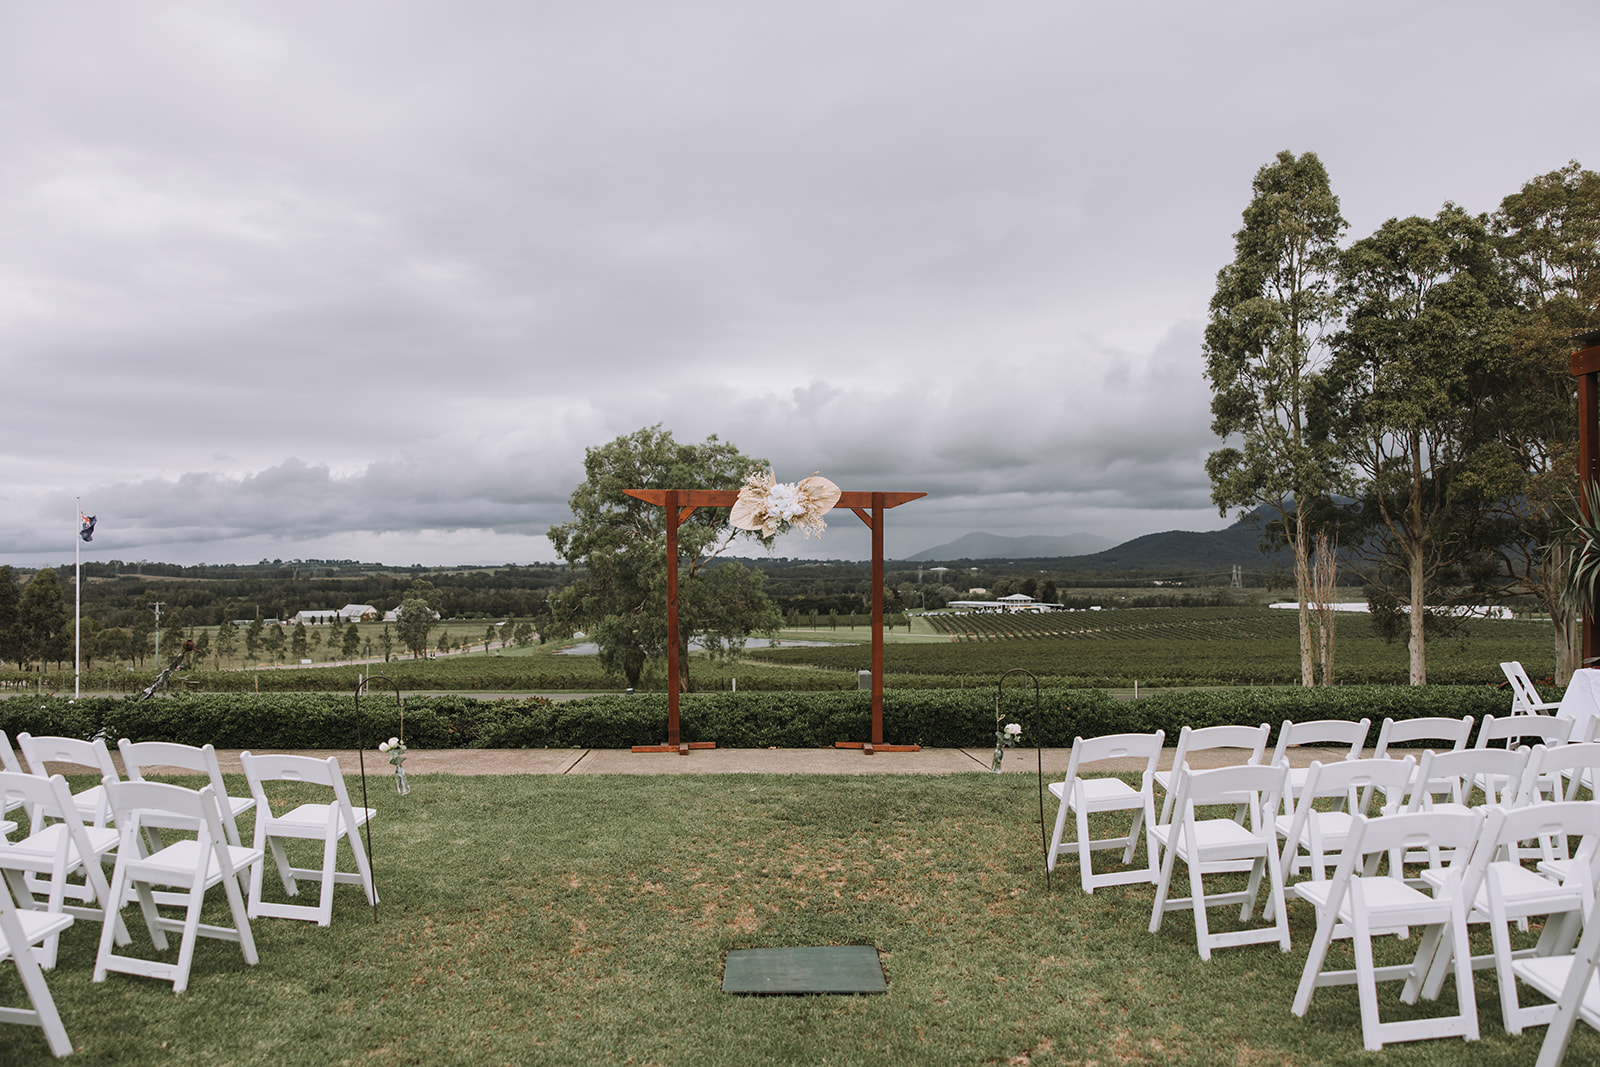 Hunter Valley Wedding Planner - Real Wedding: Kristie + Cole. Estate Tuscany. Photos by Nicole Butler Photography